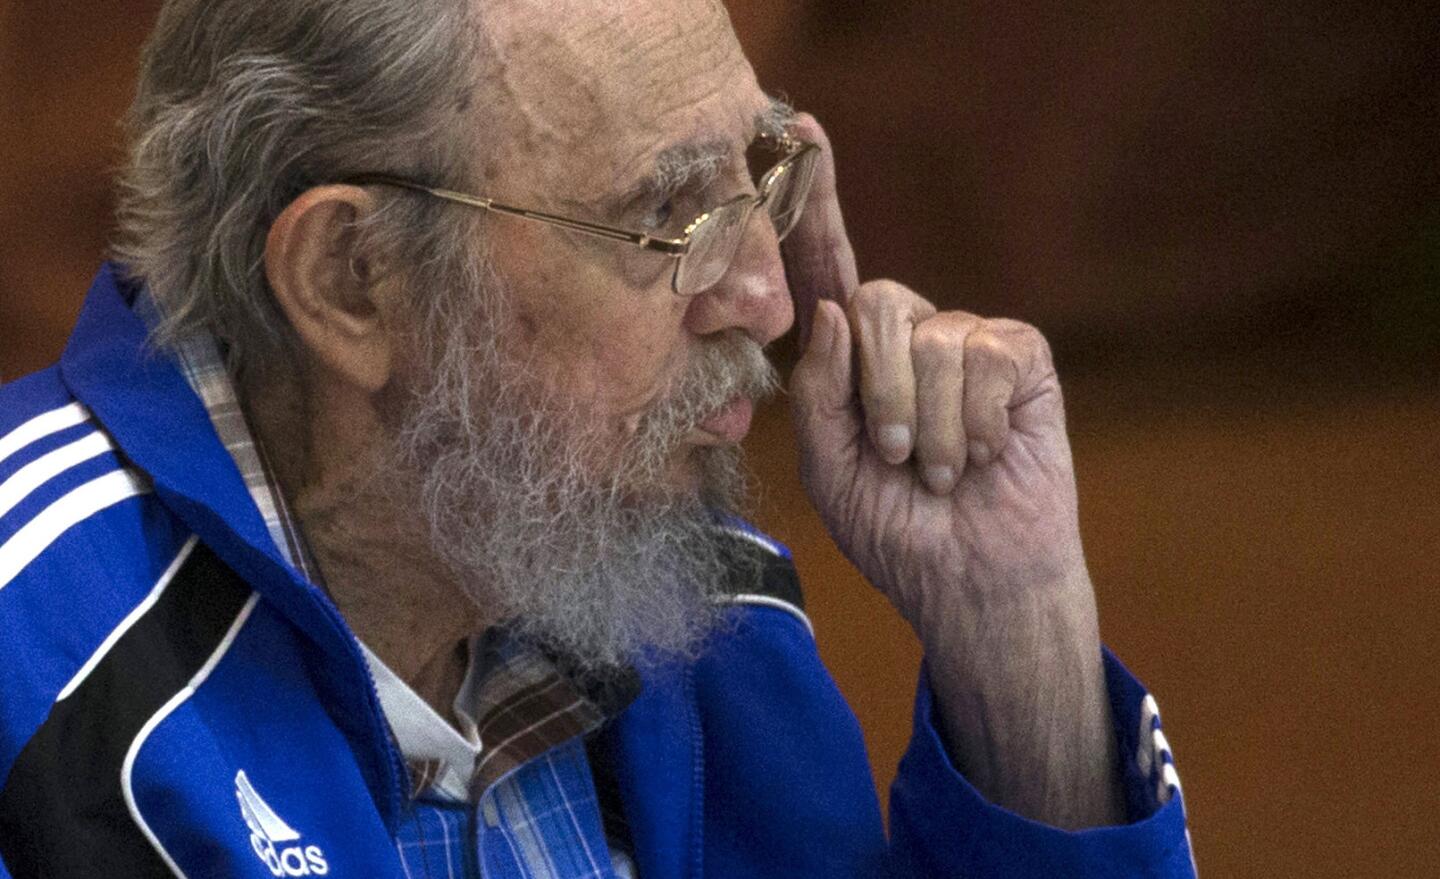 2016: Fidel Castro addresses delegates on the last day of the 7th Cuban Communist Party Congress in Havana on April 19, 2016, his most recent public appearance.